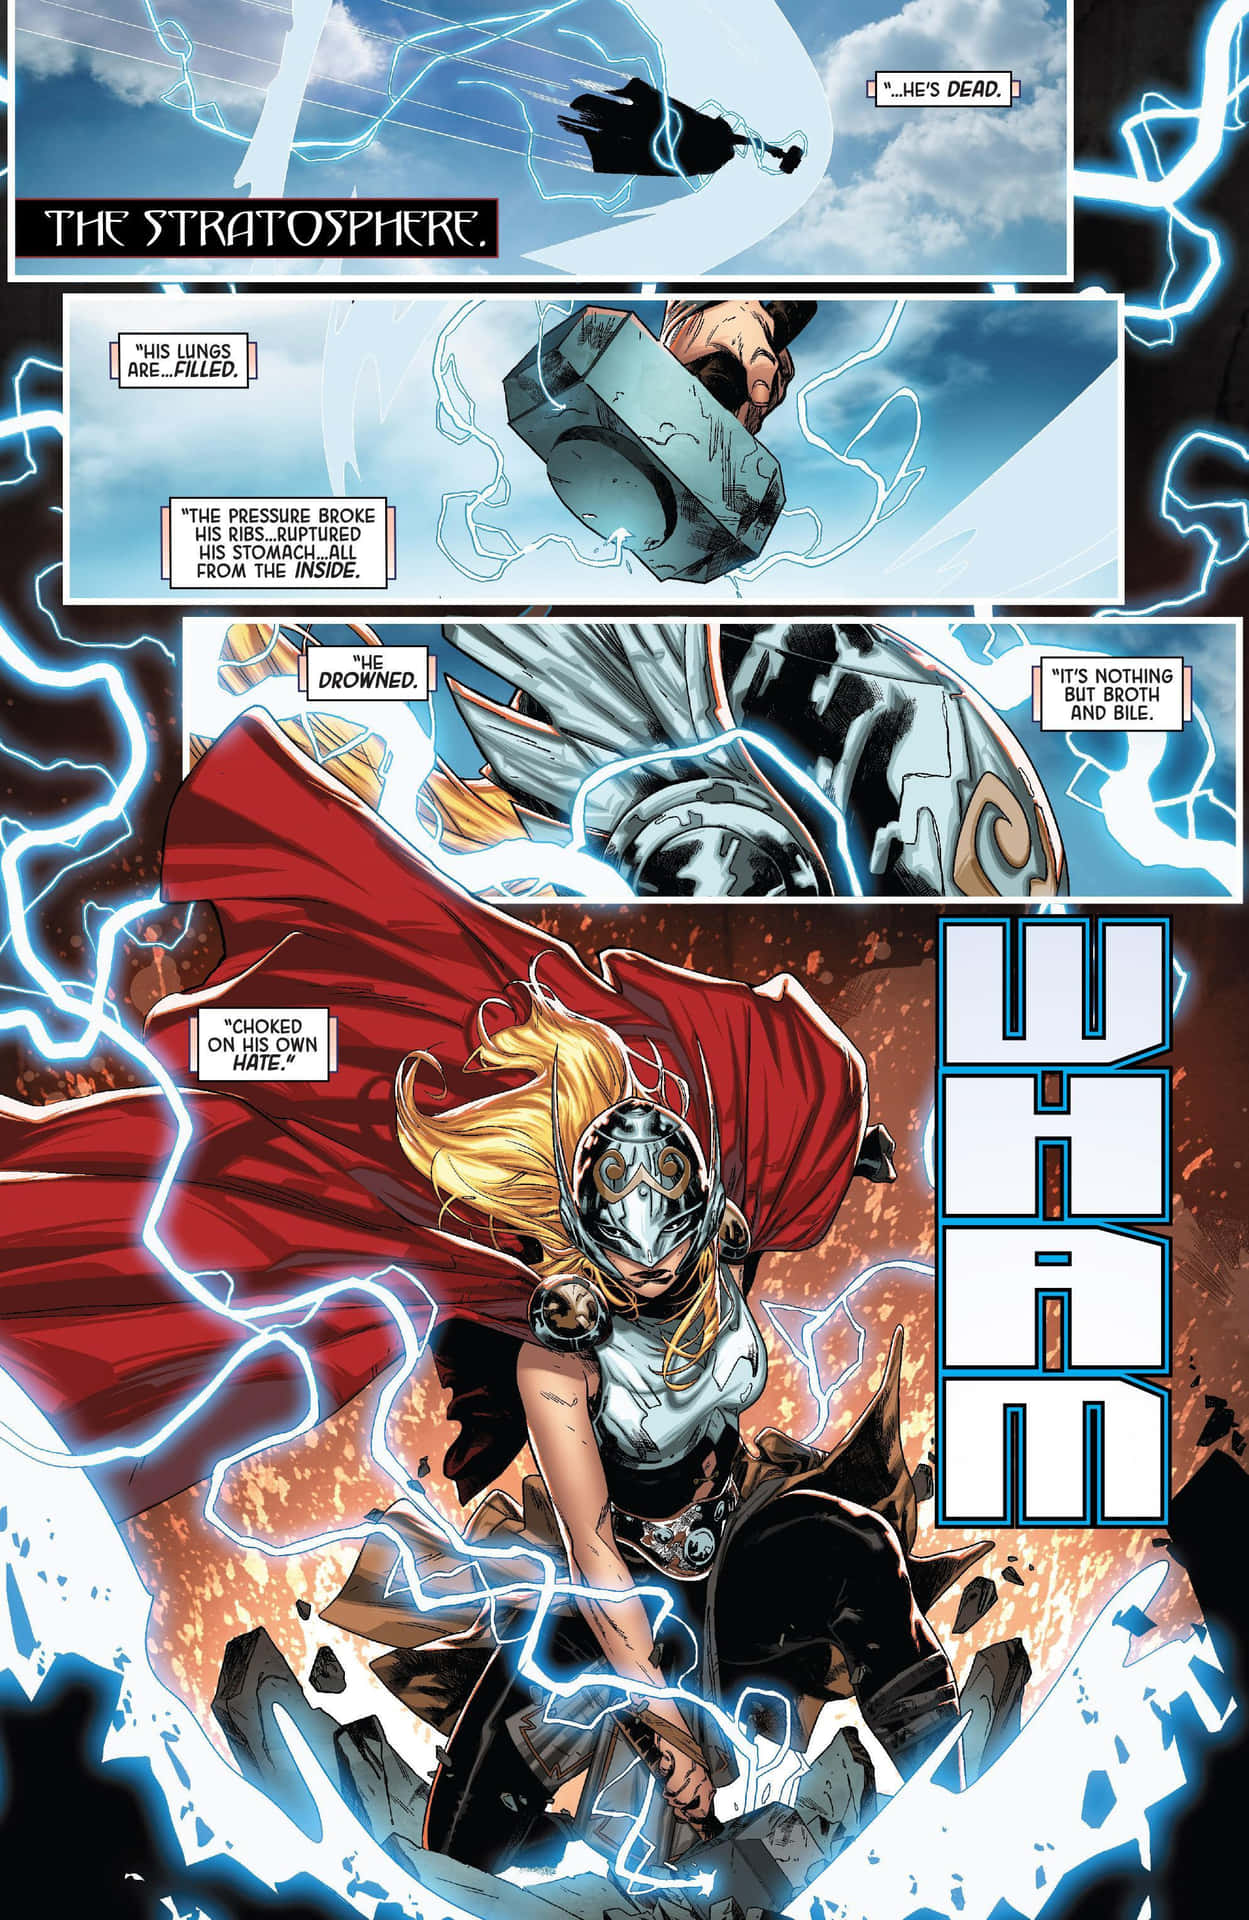 Jane Foster as the Mighty Thor in Marvel Comics Wallpaper